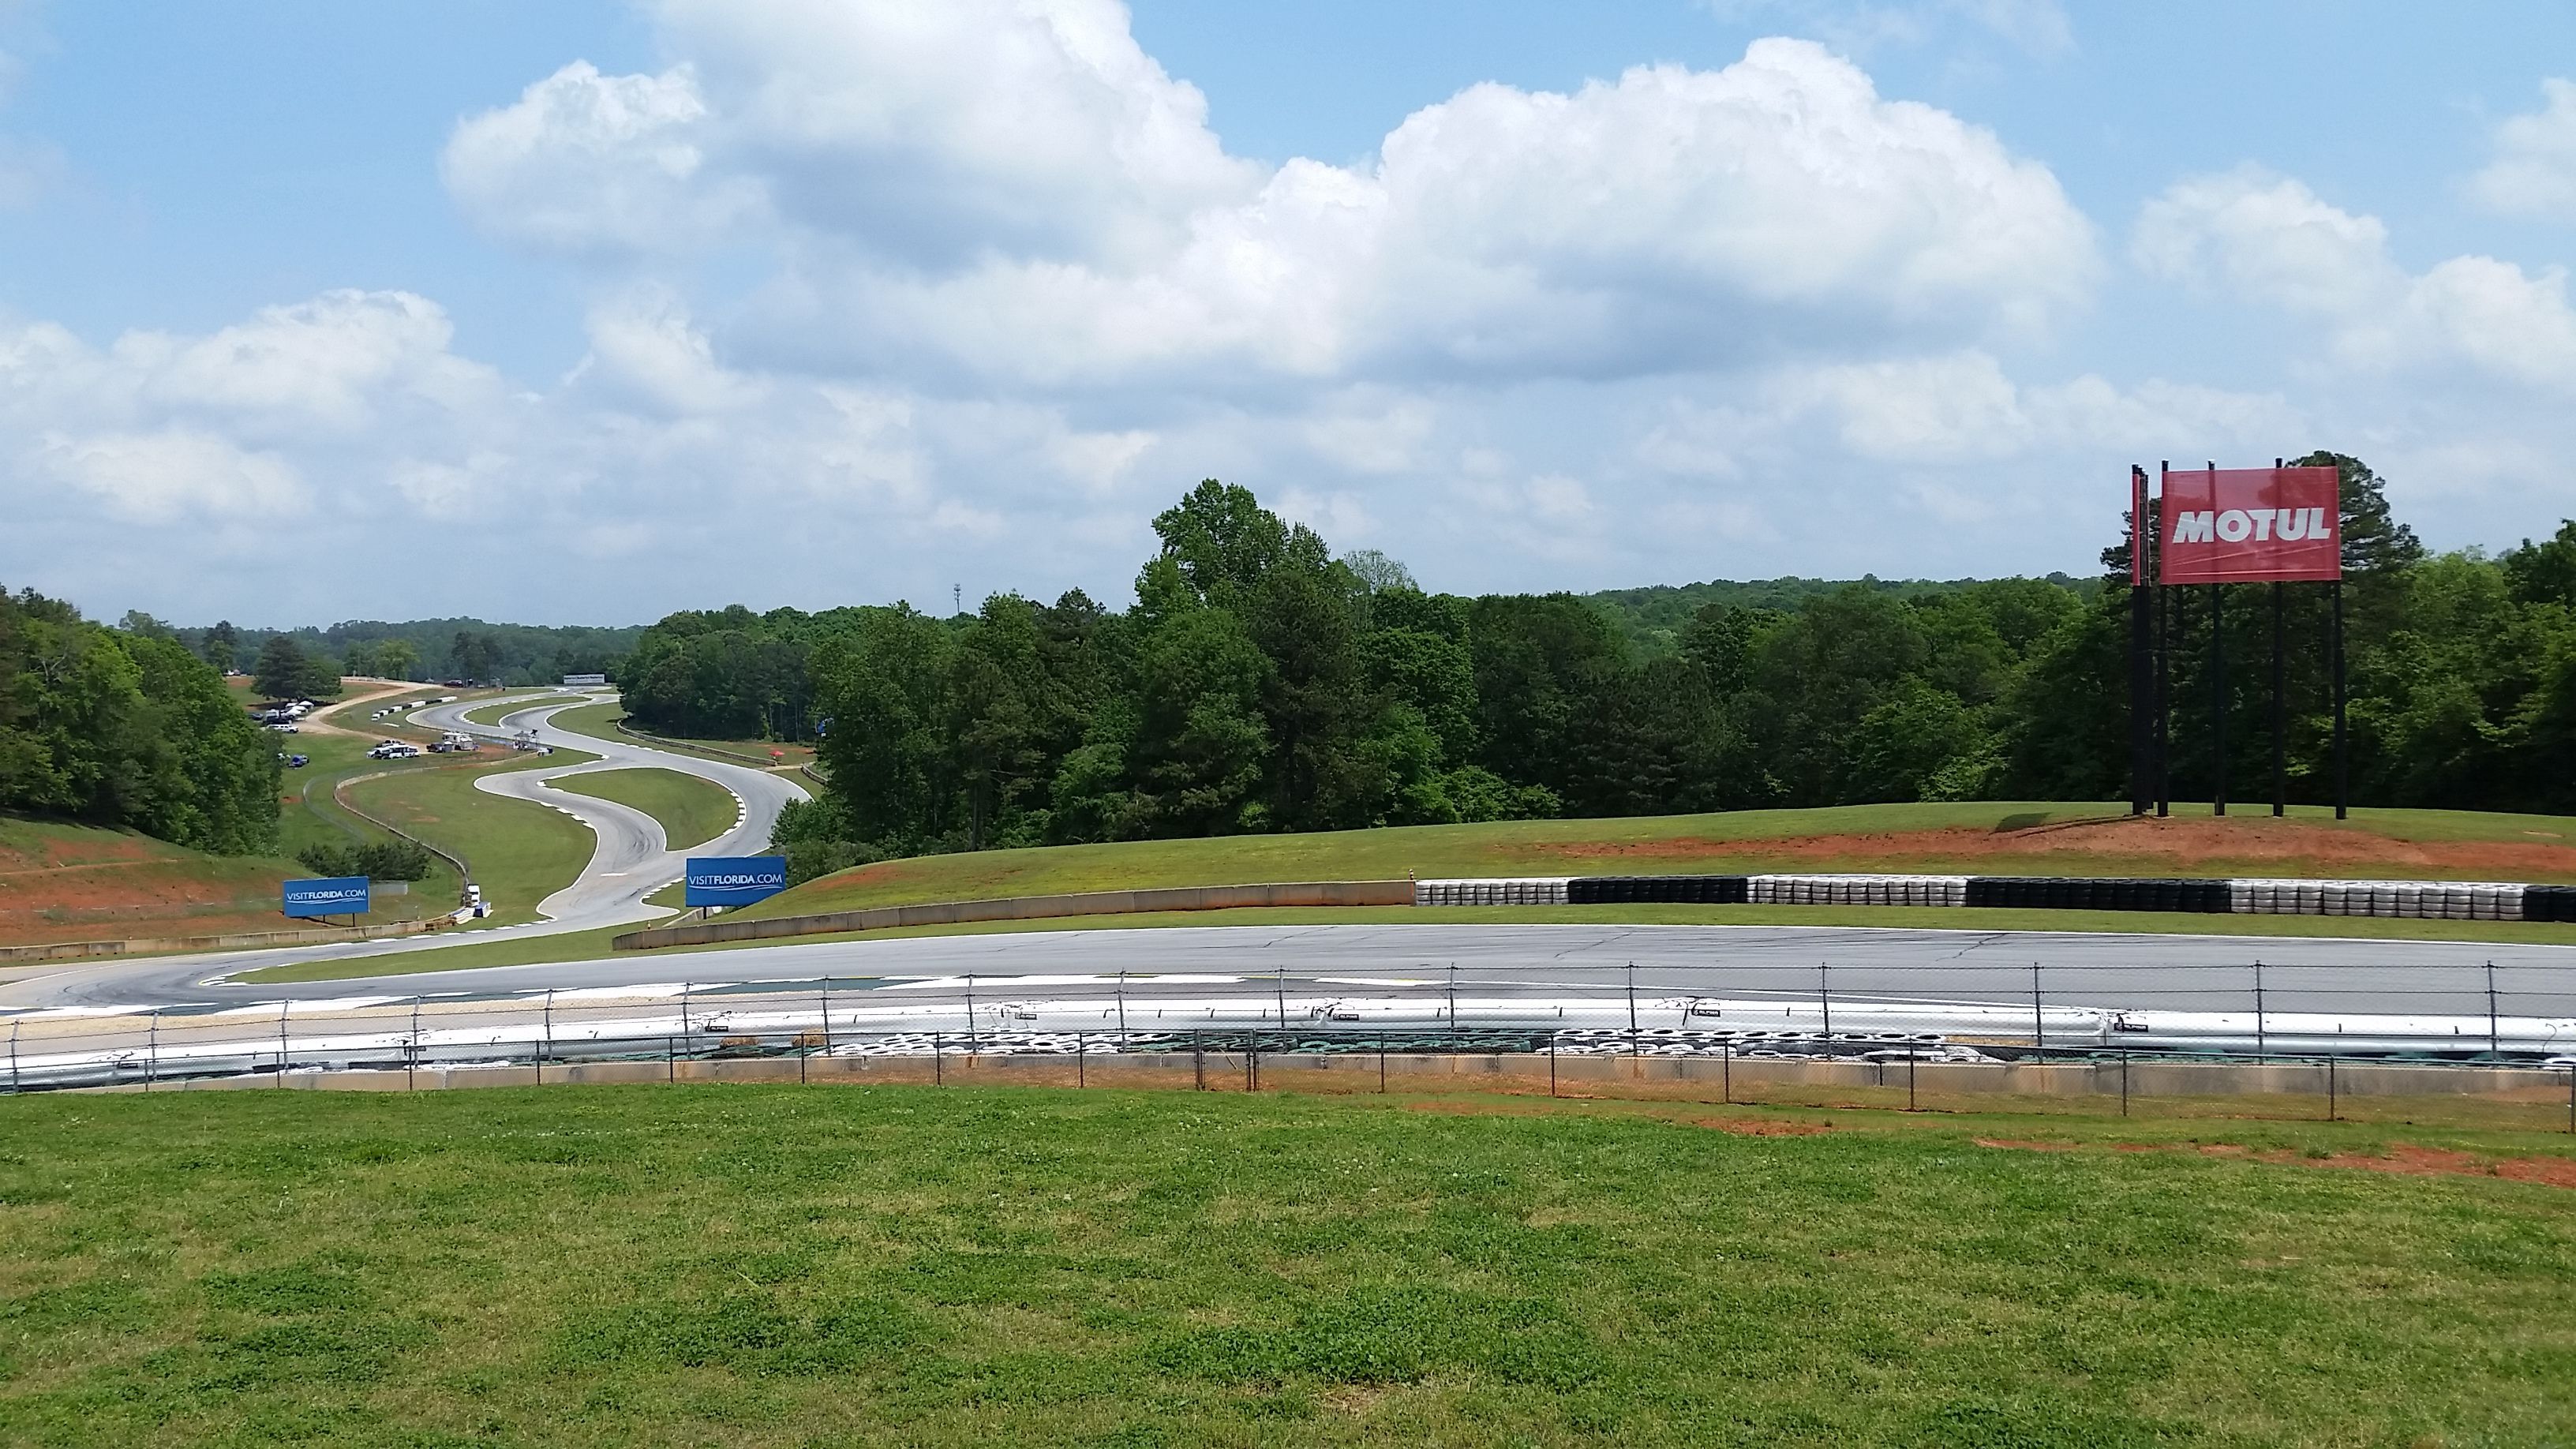 The view of turns 2, 3, 4 and 5 from the hill.